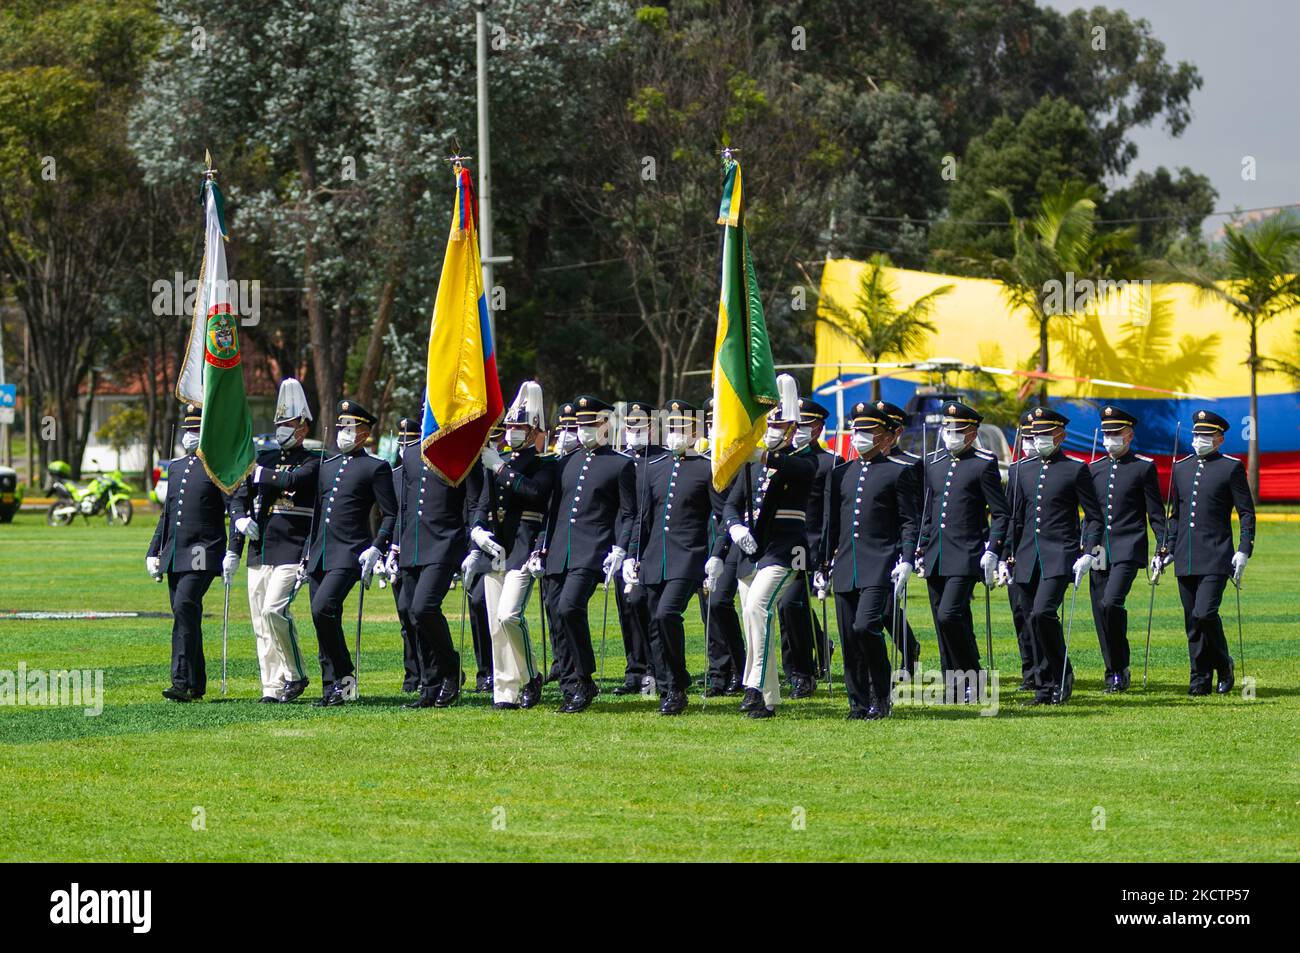 Newly promoted Police officers participate in their promotion ceremony during an event were Colombia's president Ivan Duque Marquez and Colombia's Minister of Defense Diego Molano in conmmemoration of the 130 anniversary of Colombia's National Police and the promotion to officers to more than a 100 police members, in Bogota, Colombia on November 11, 2021. (Photo by Sebastian Barros/NurPhoto) Stock Photo